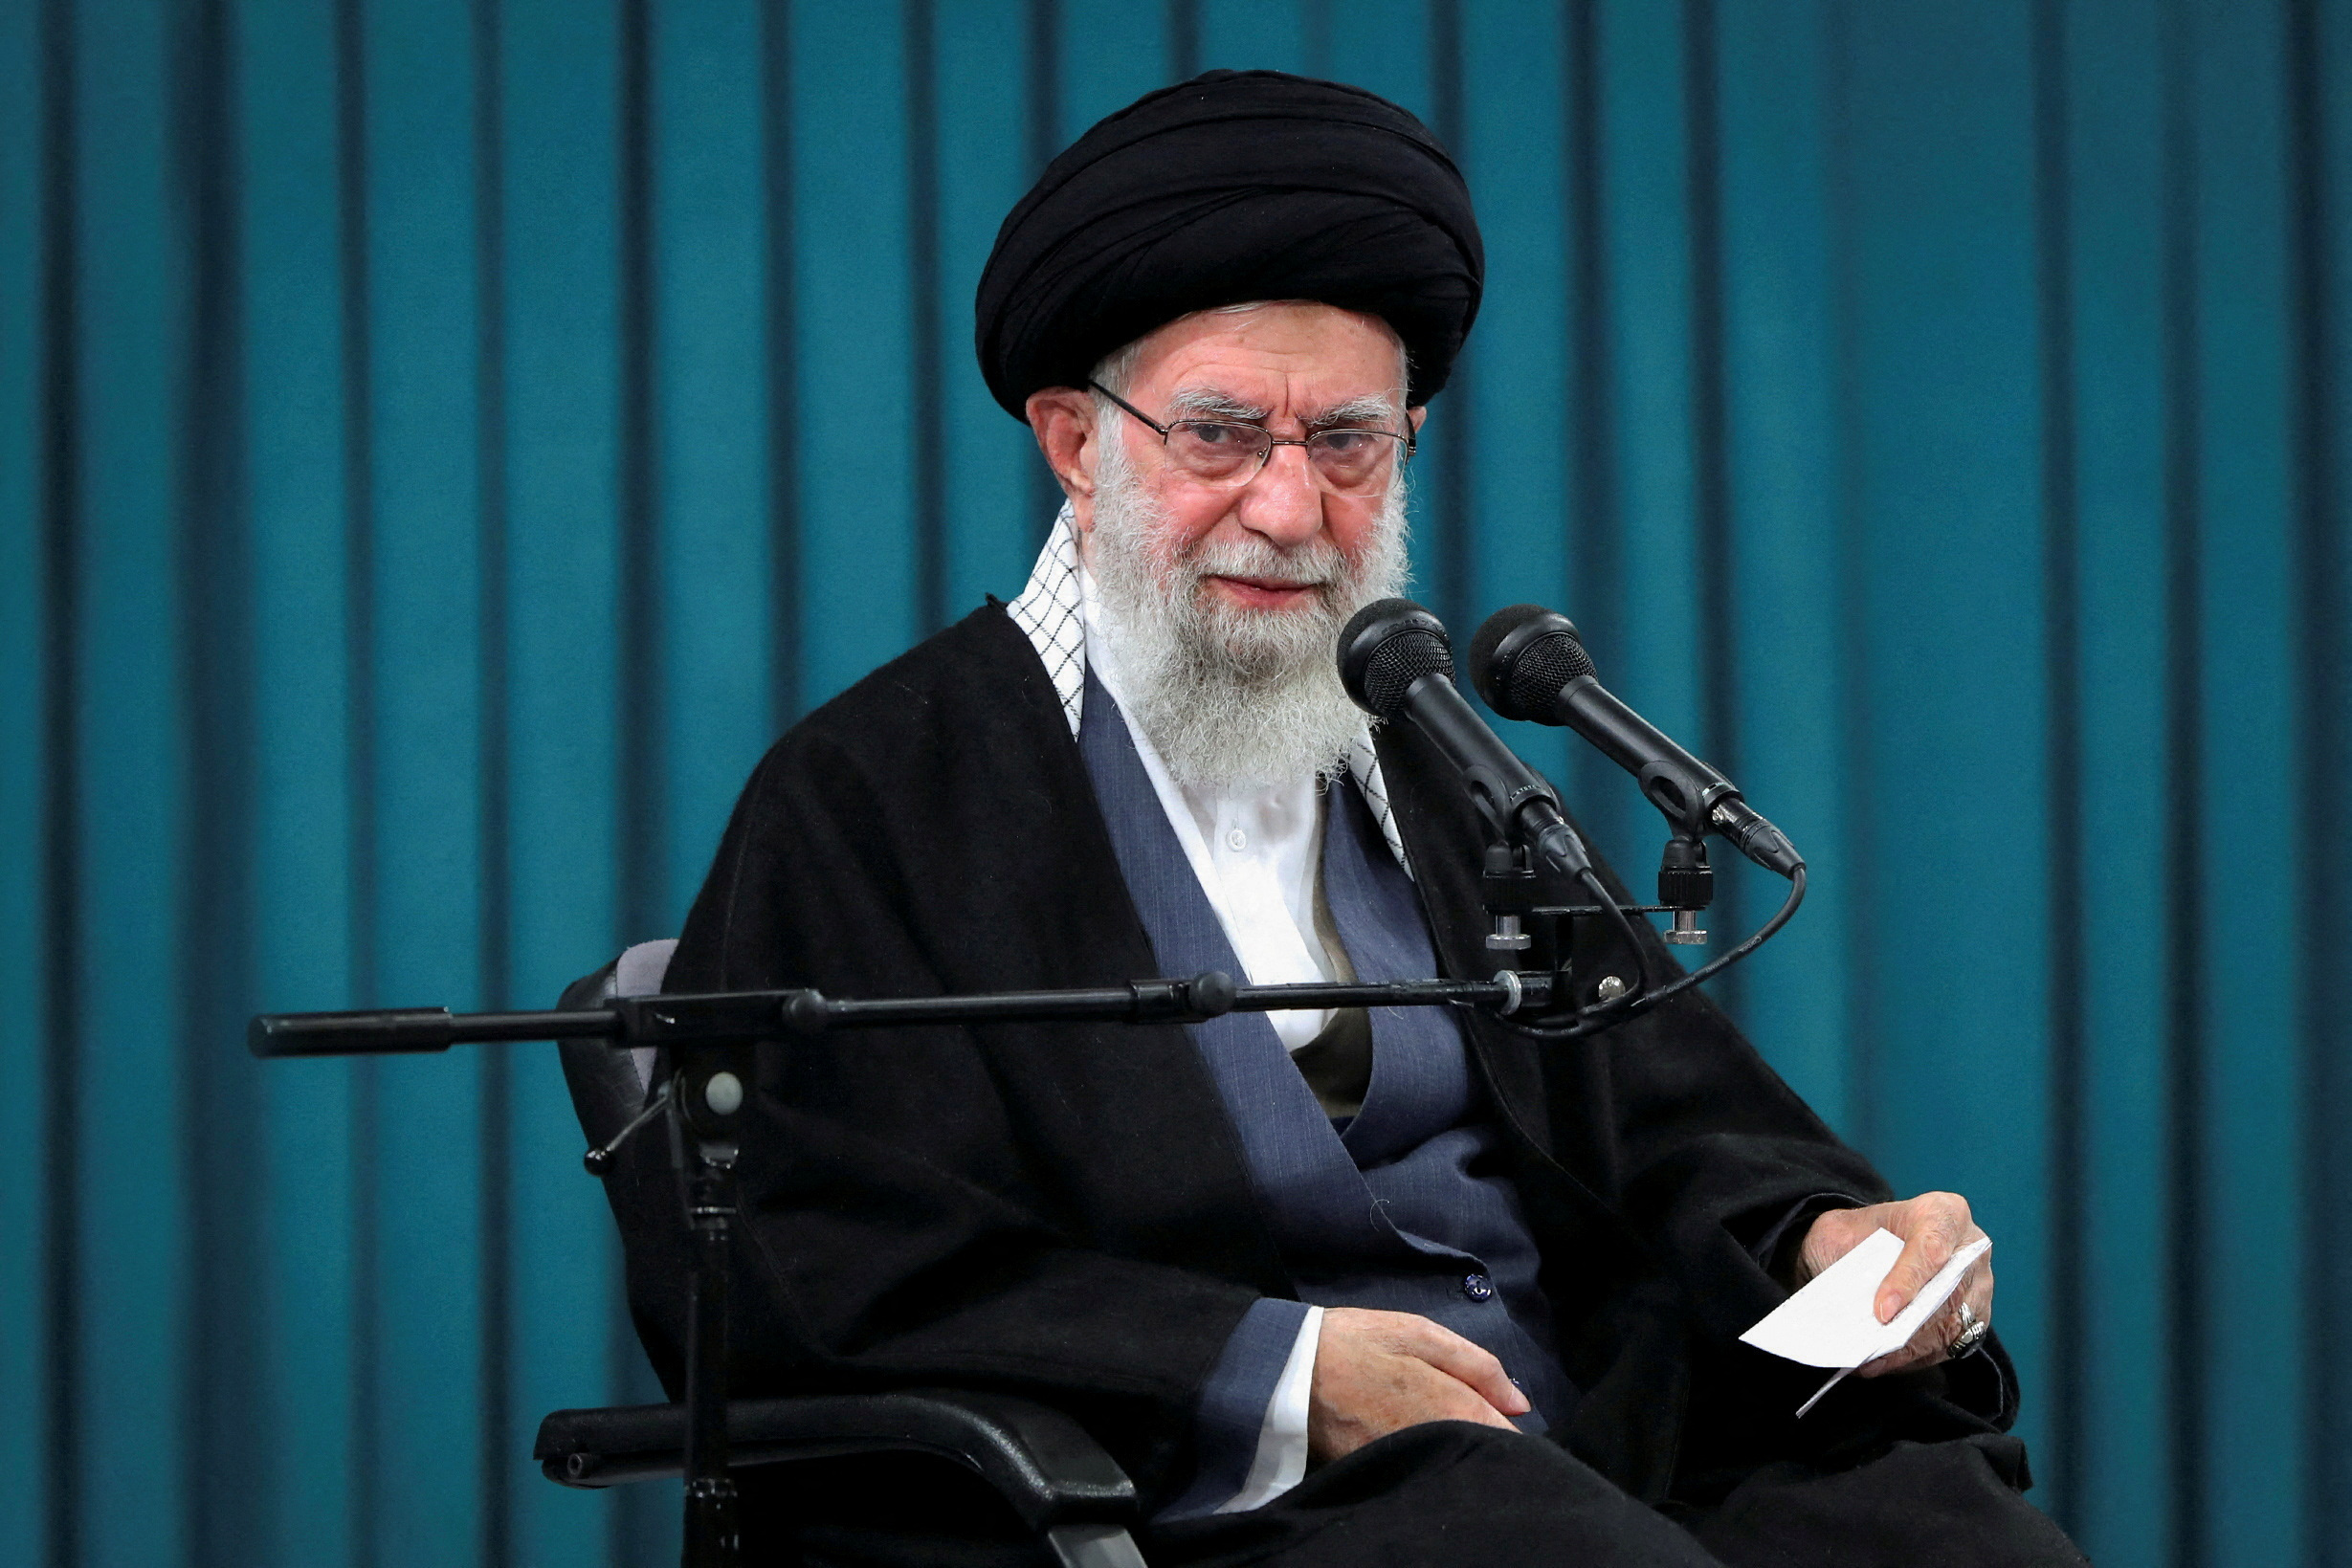 Iran's Supreme Leader Ayatollah Ali Khamenei speaks during a meeting with a group of eulogists in Tehran